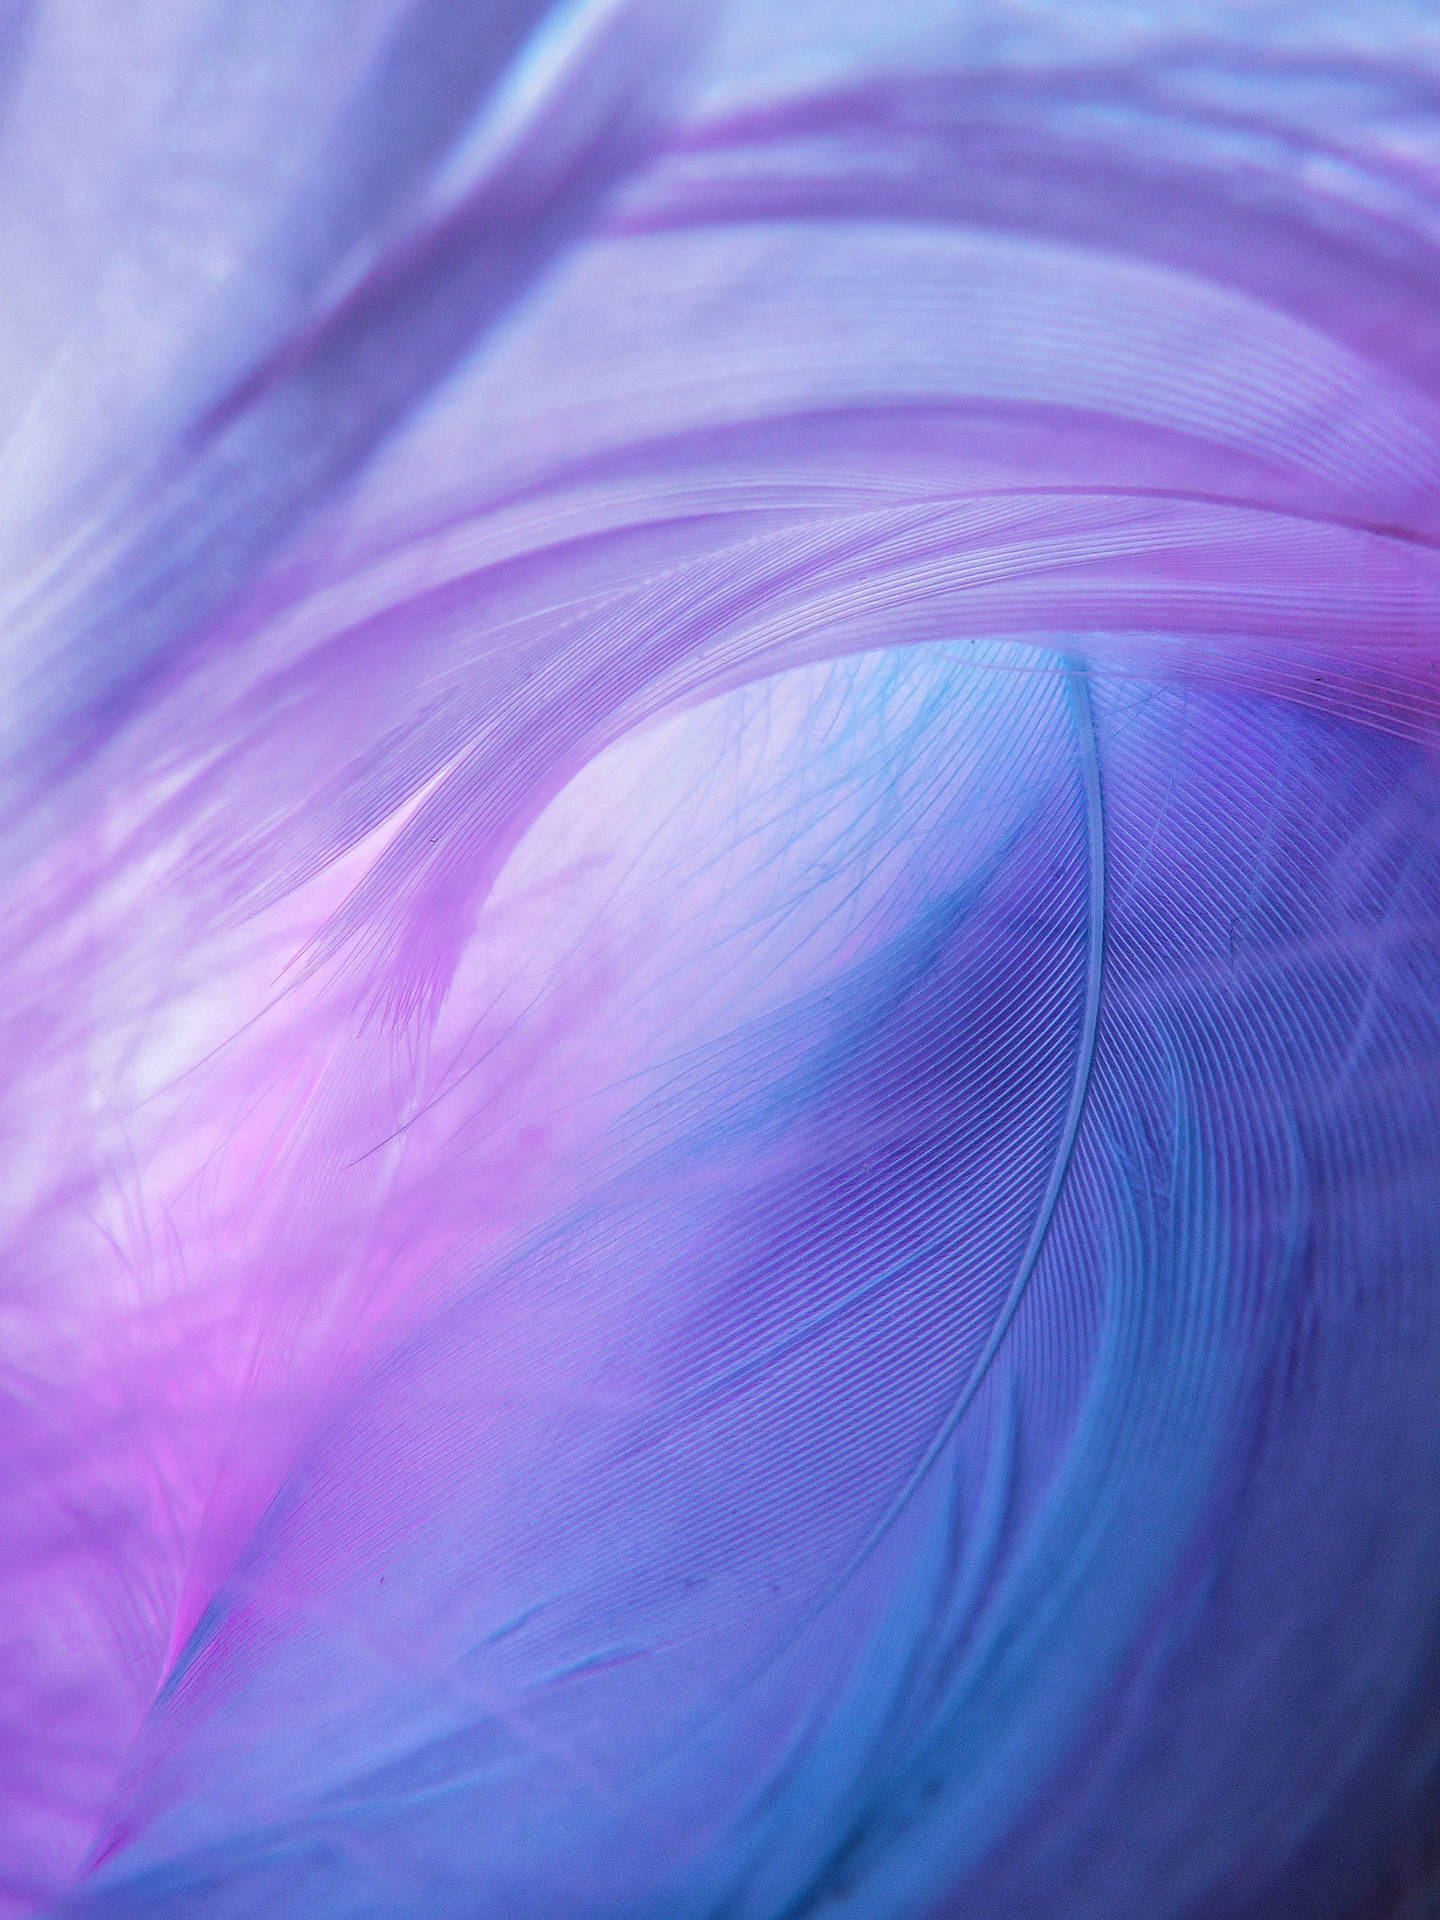 Cool Aesthetic Purple Feathers Wallpaper